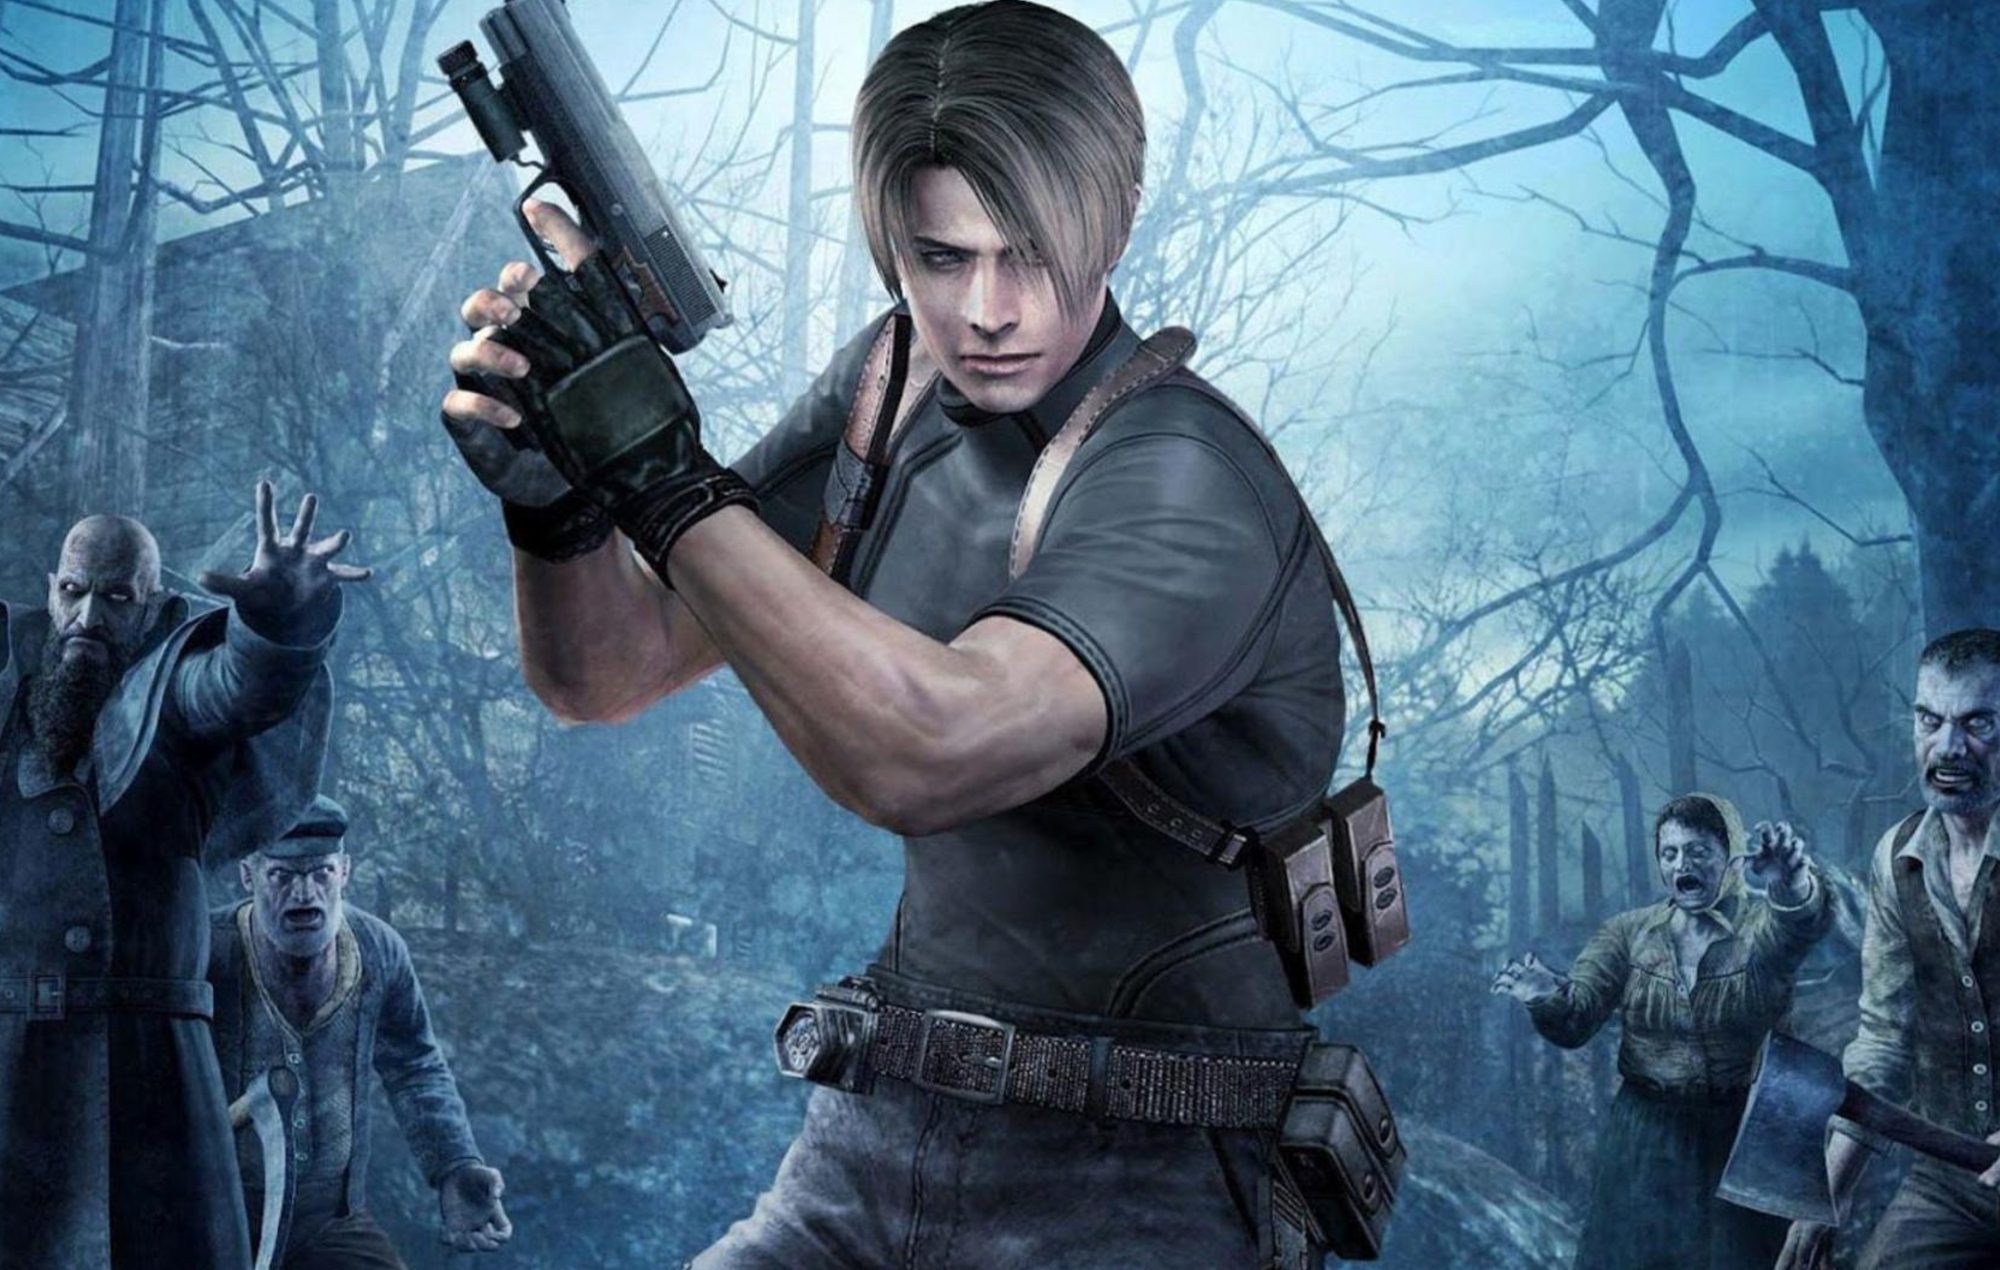 Resident Evil 4 VR review: An amazing remake of an all-time great